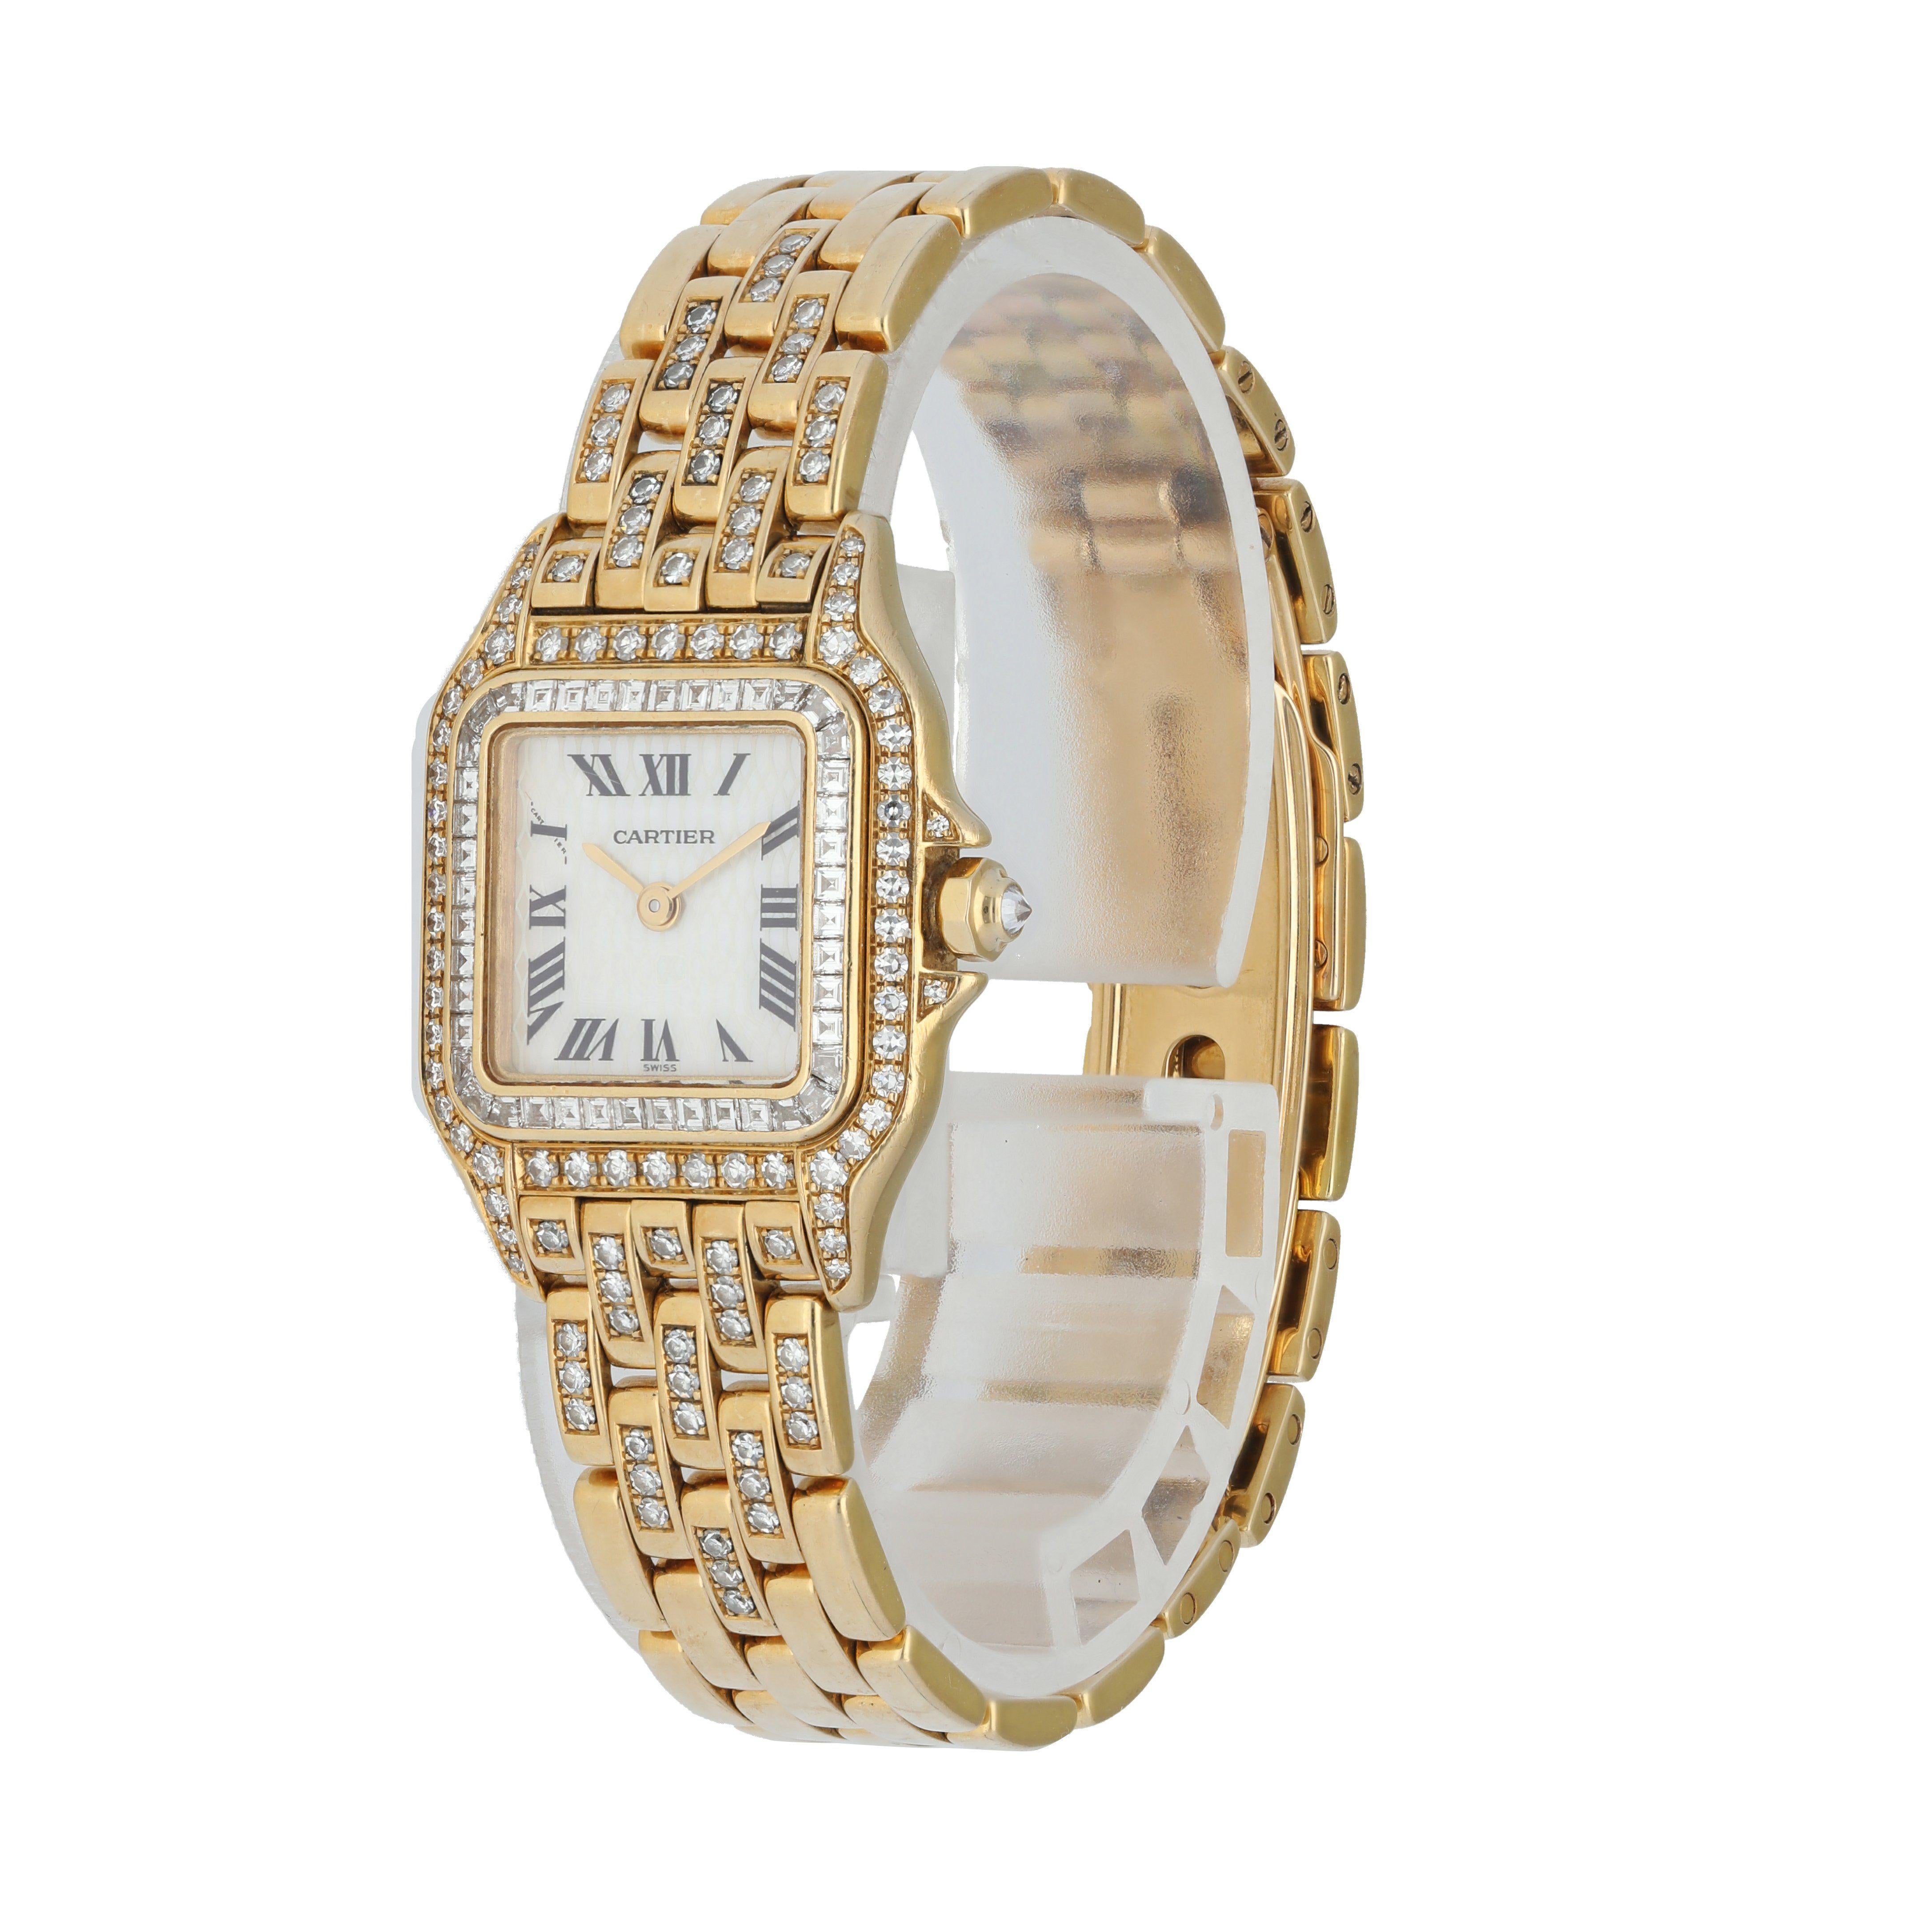 Cartier Panthere 2361 MOP Dial Diamond Ladies Watch.
22mm yellow gold case with factory set diamond case and bezel.
Mother of pearl anniversary dial with gold hands and Roman numeral hour markers. 
Yellow gold bracelet with factory set diamonds and